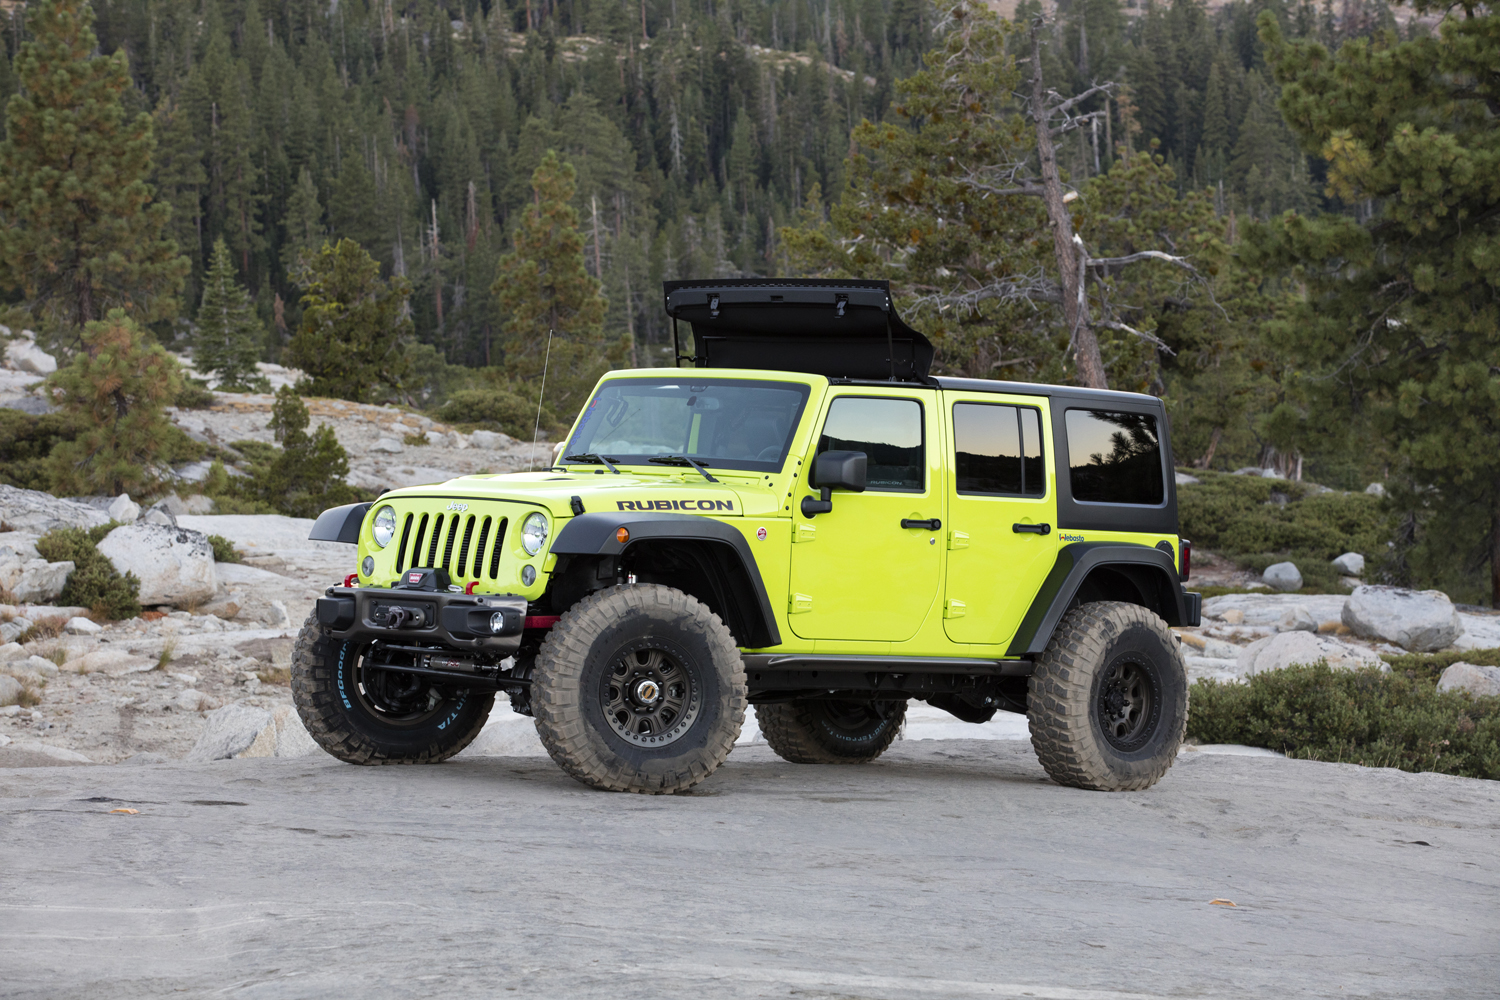 Webasto’s new ThrowBack one-piece folding fabric roof for the Jeep Wrangler has a patented, rivetless design.